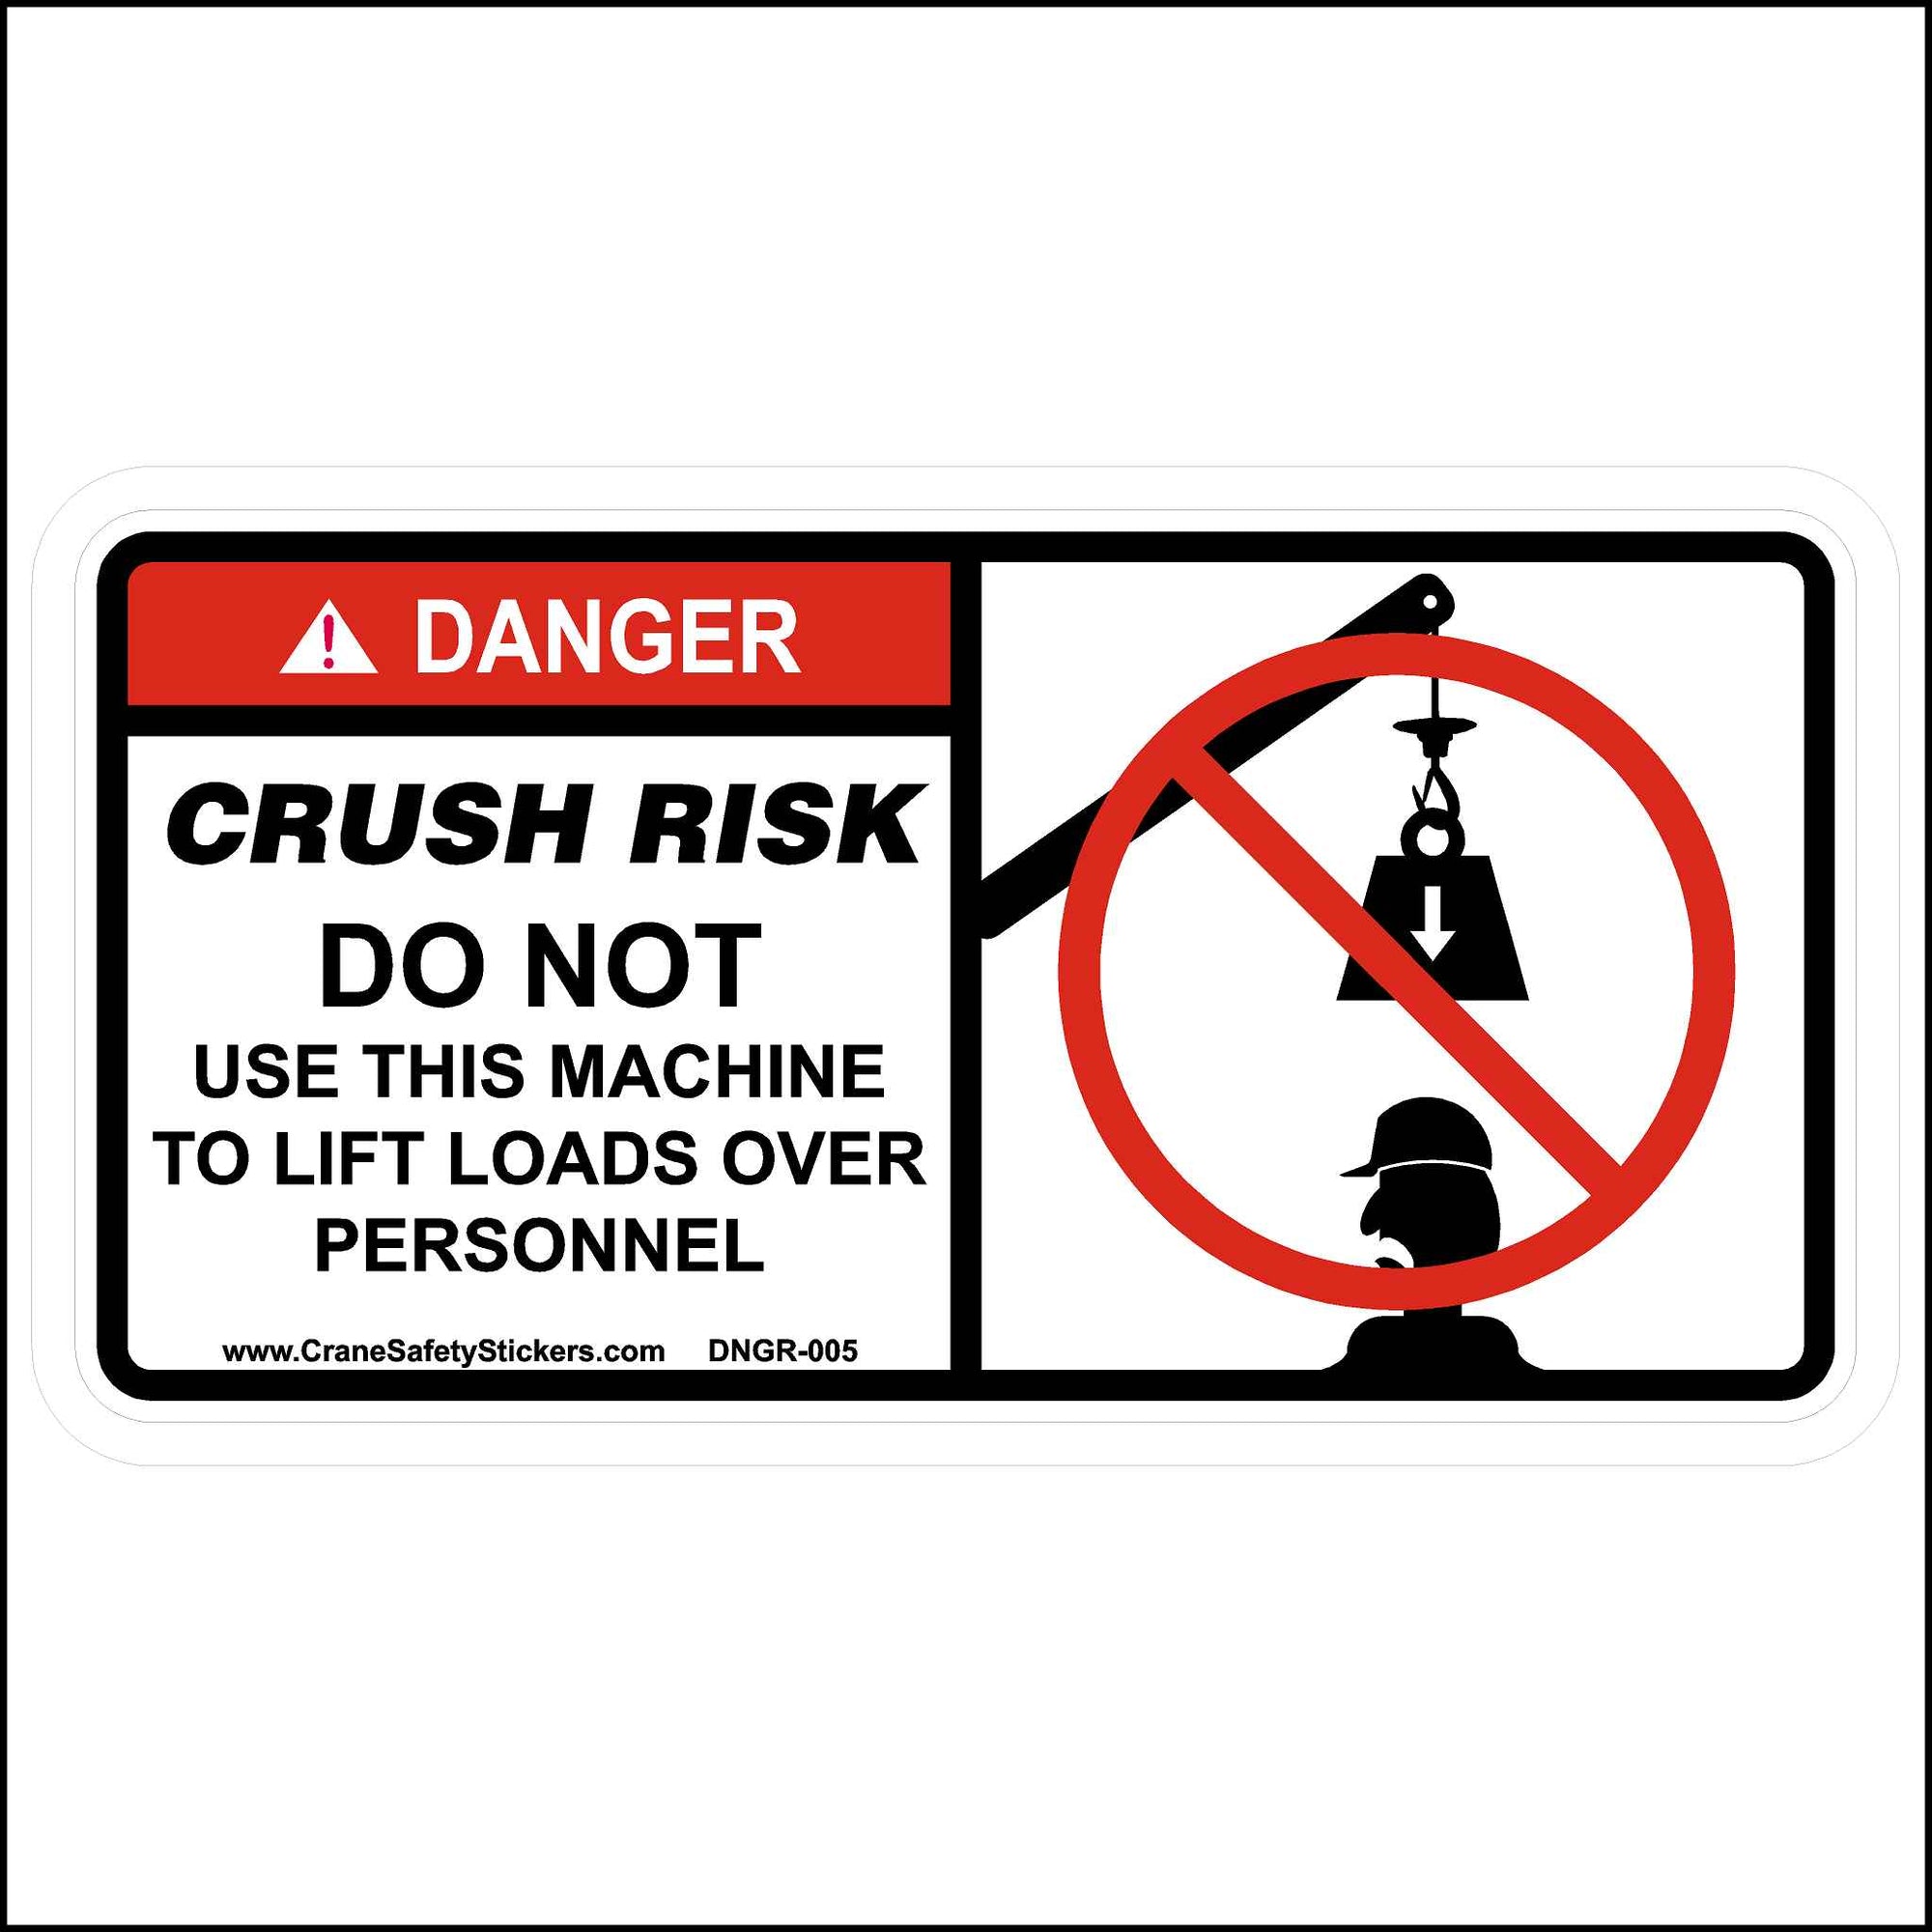 Do Not Lift Loads Over Personnel Safety Sticker.